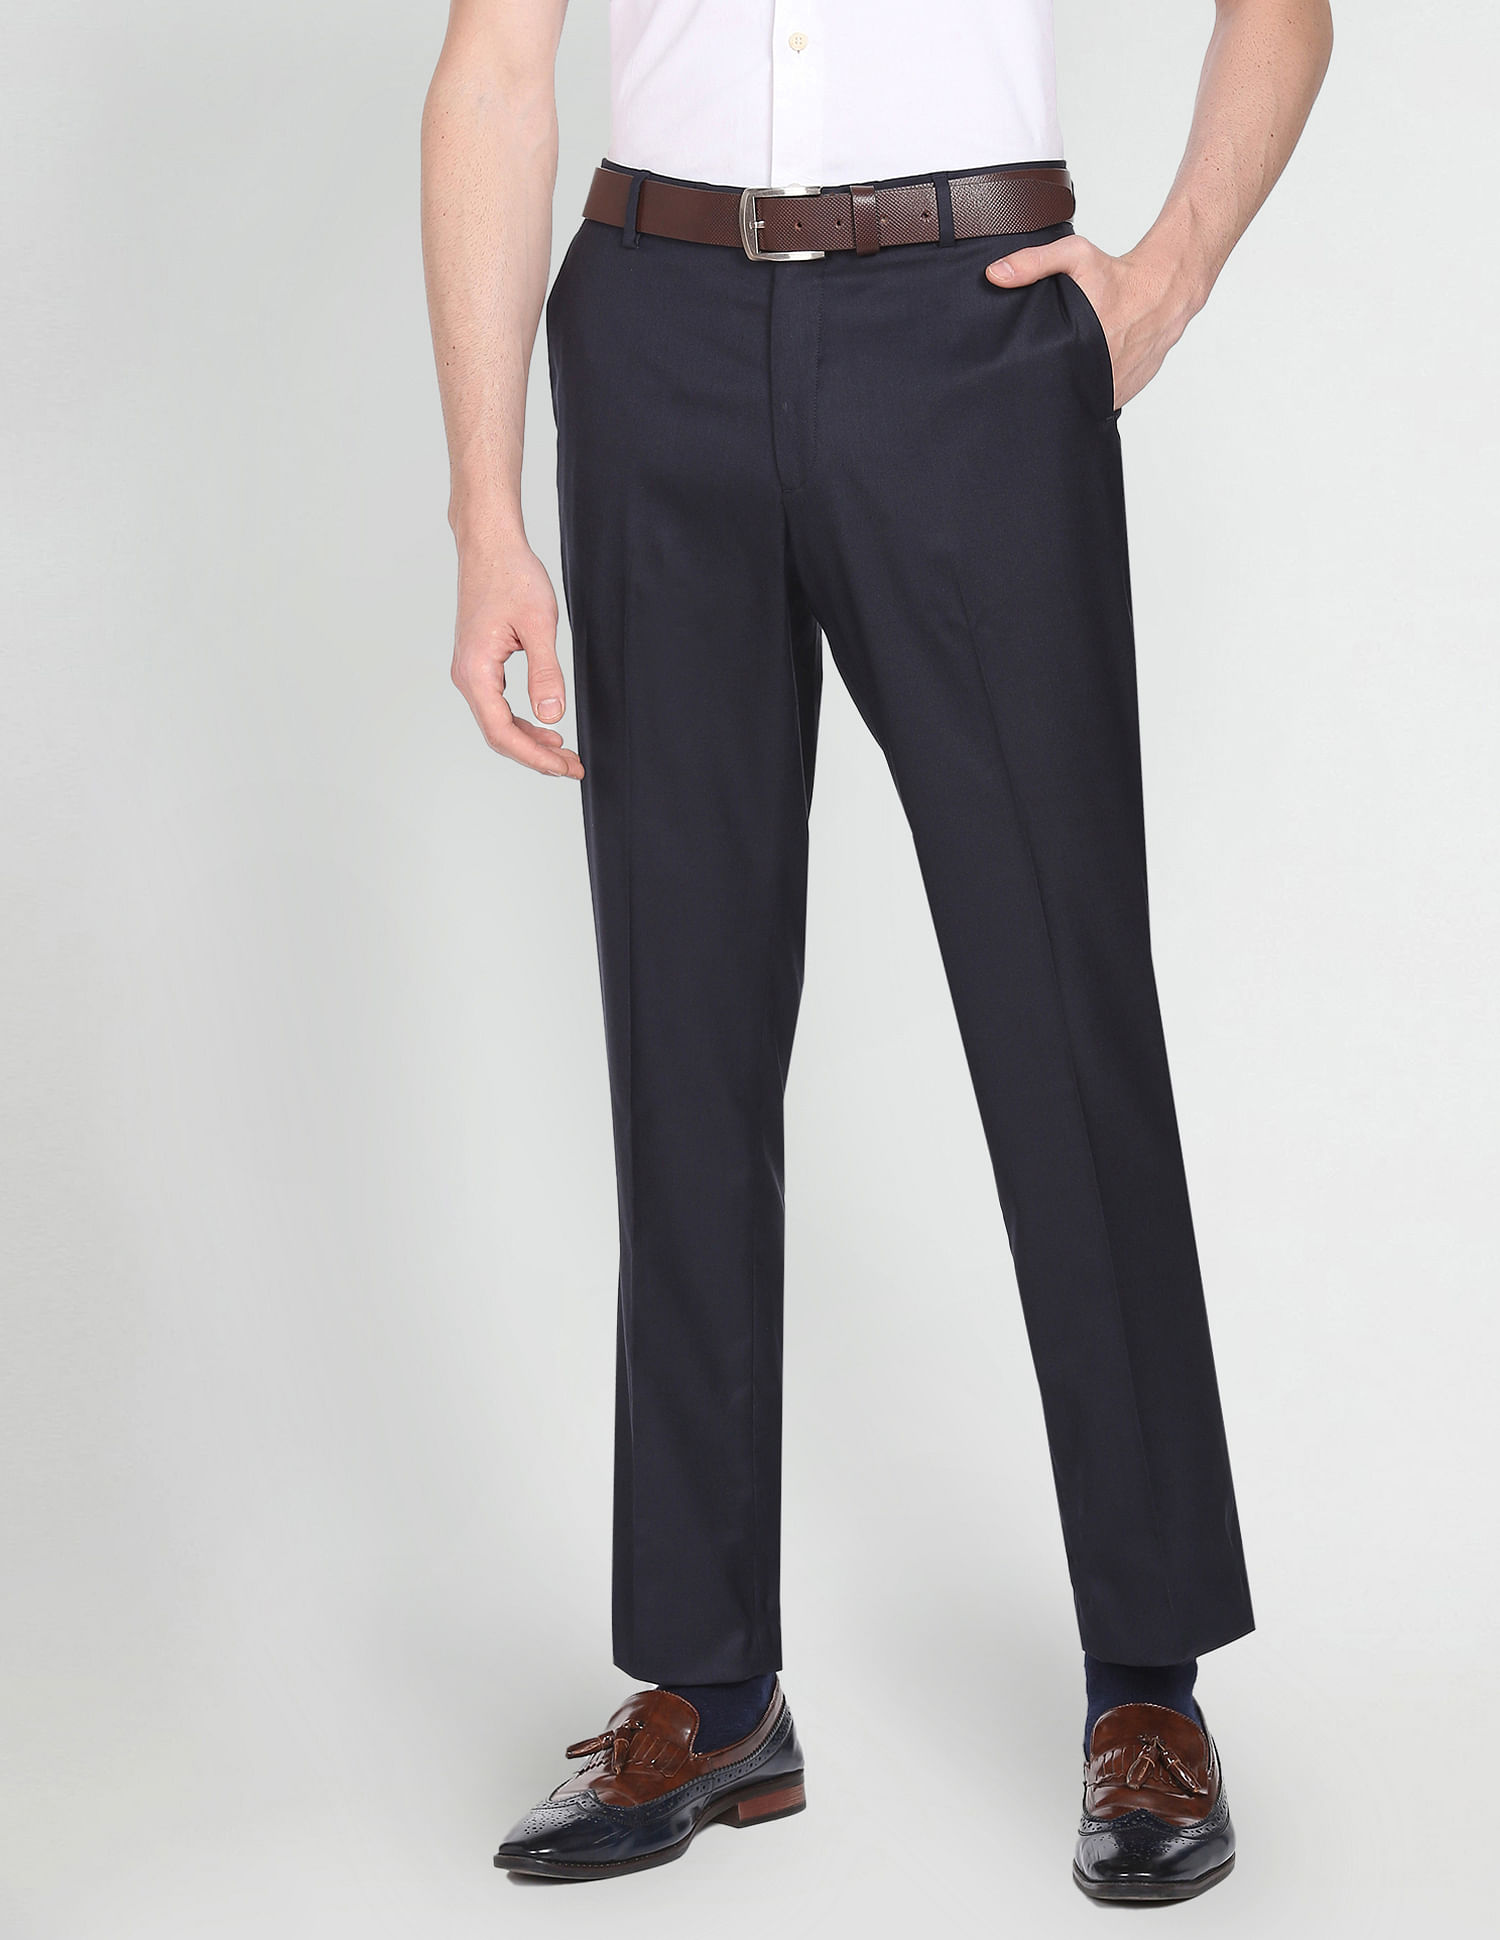 Tailored Trousers for Women | Shop Suit Trousers Online - JJXX